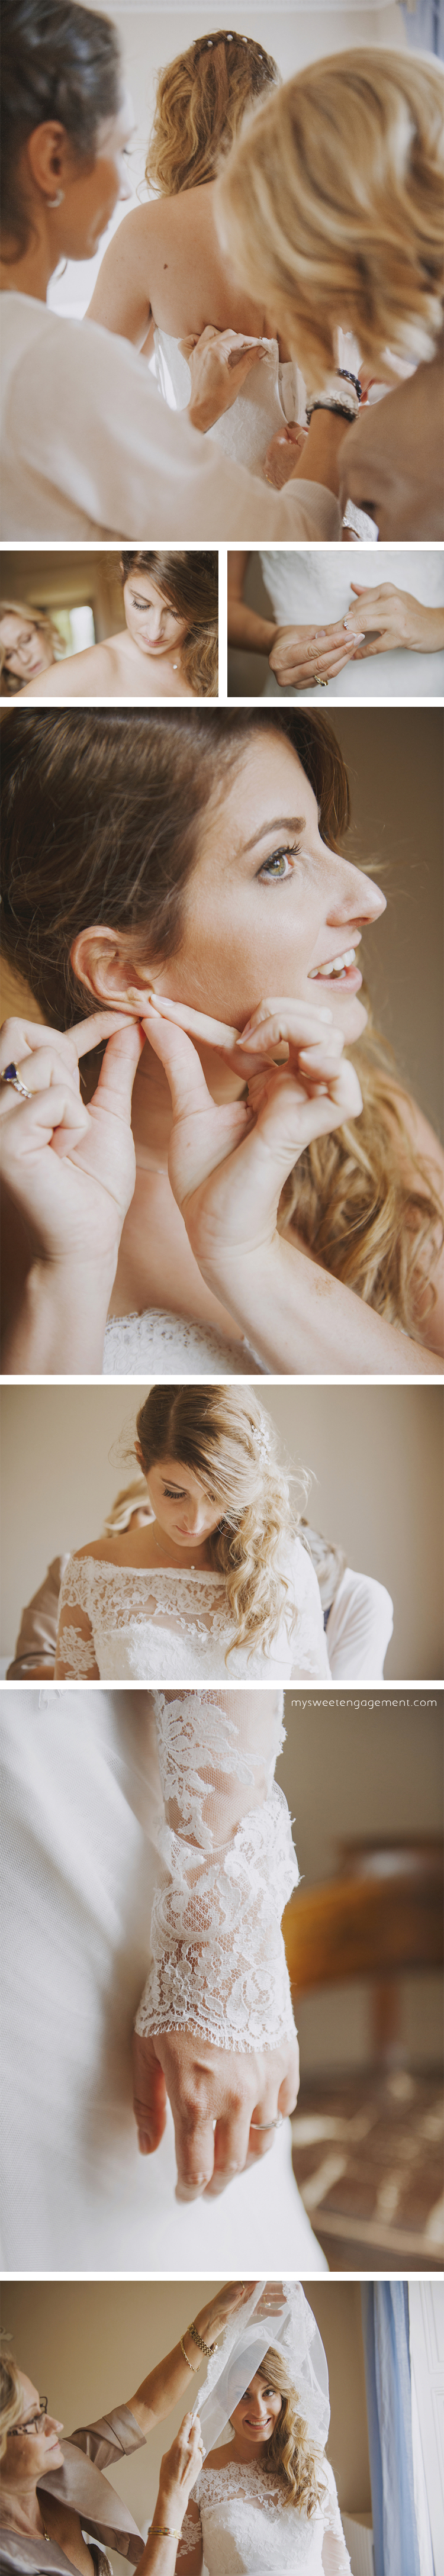 bride getting ready photos - mother of the bride - wedding blog - my sweet engagement